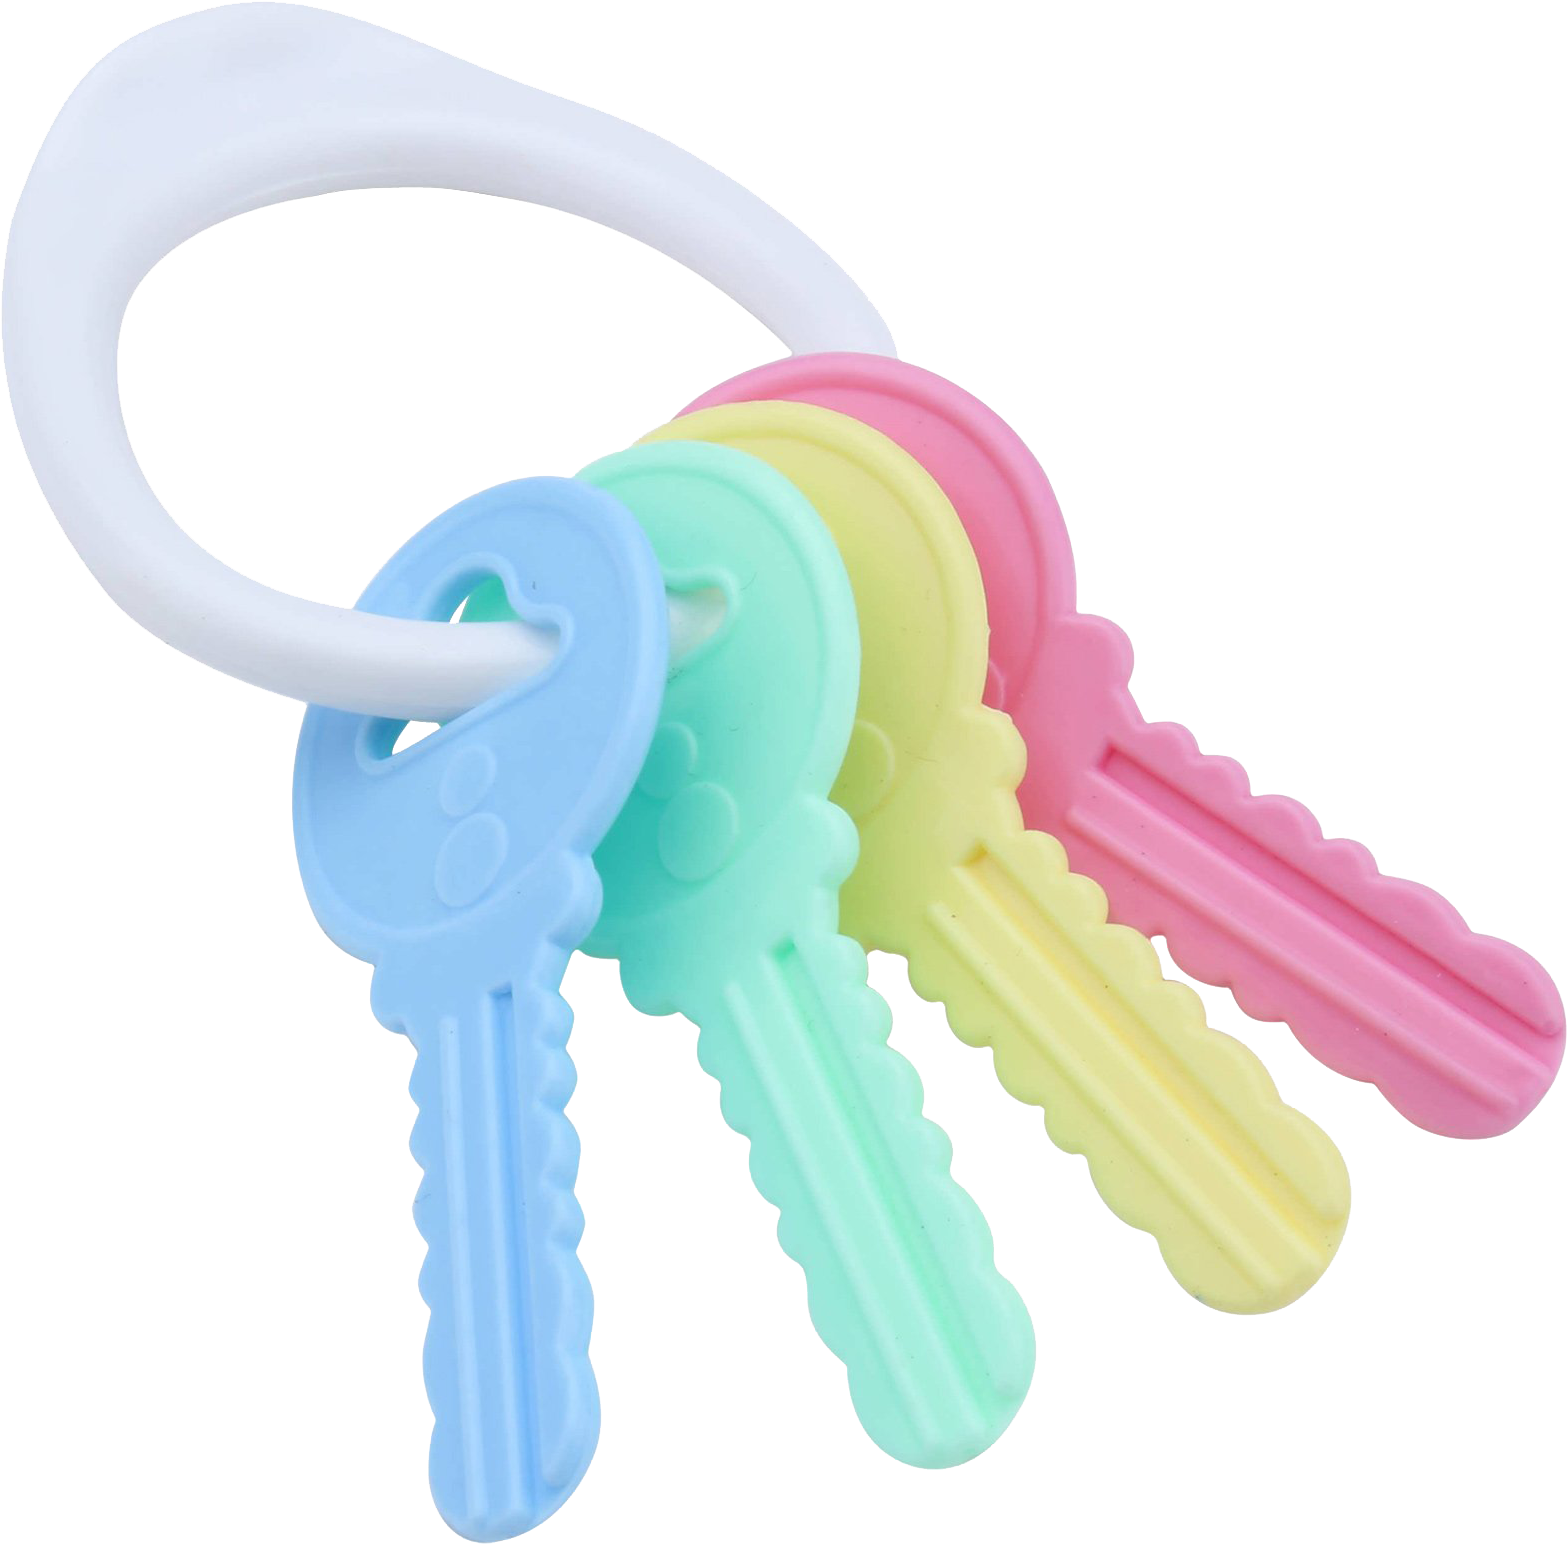 Picture of toy keys on baby tracker home page